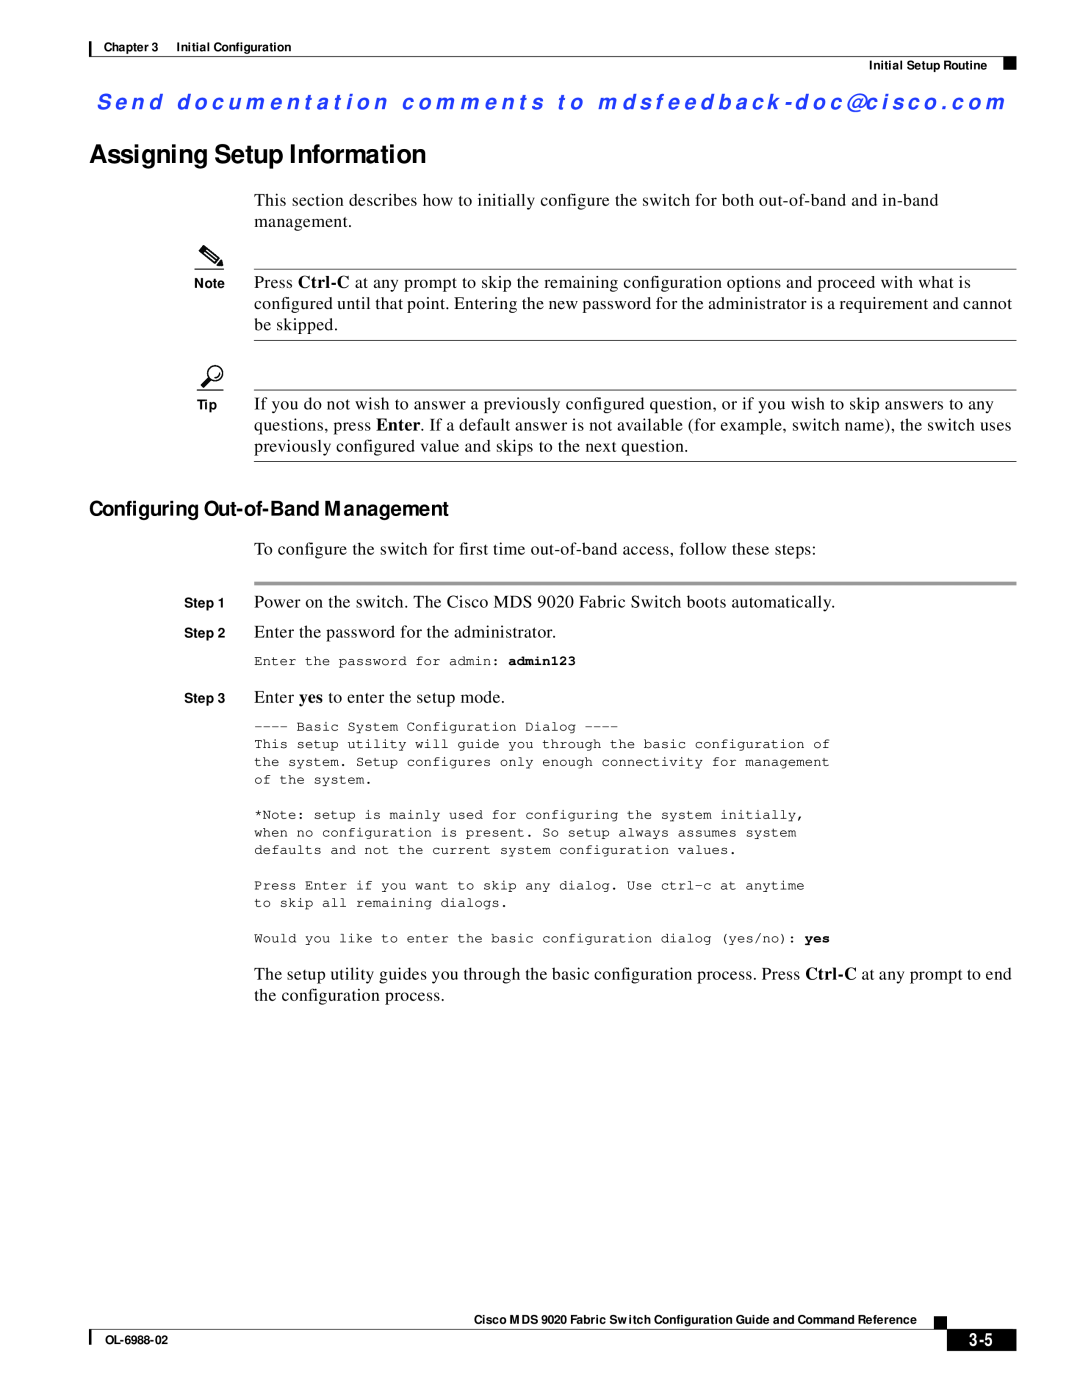 Cisco Systems MDS 9020 manual Assigning Setup Information, Configuring Out-of-Band Management 